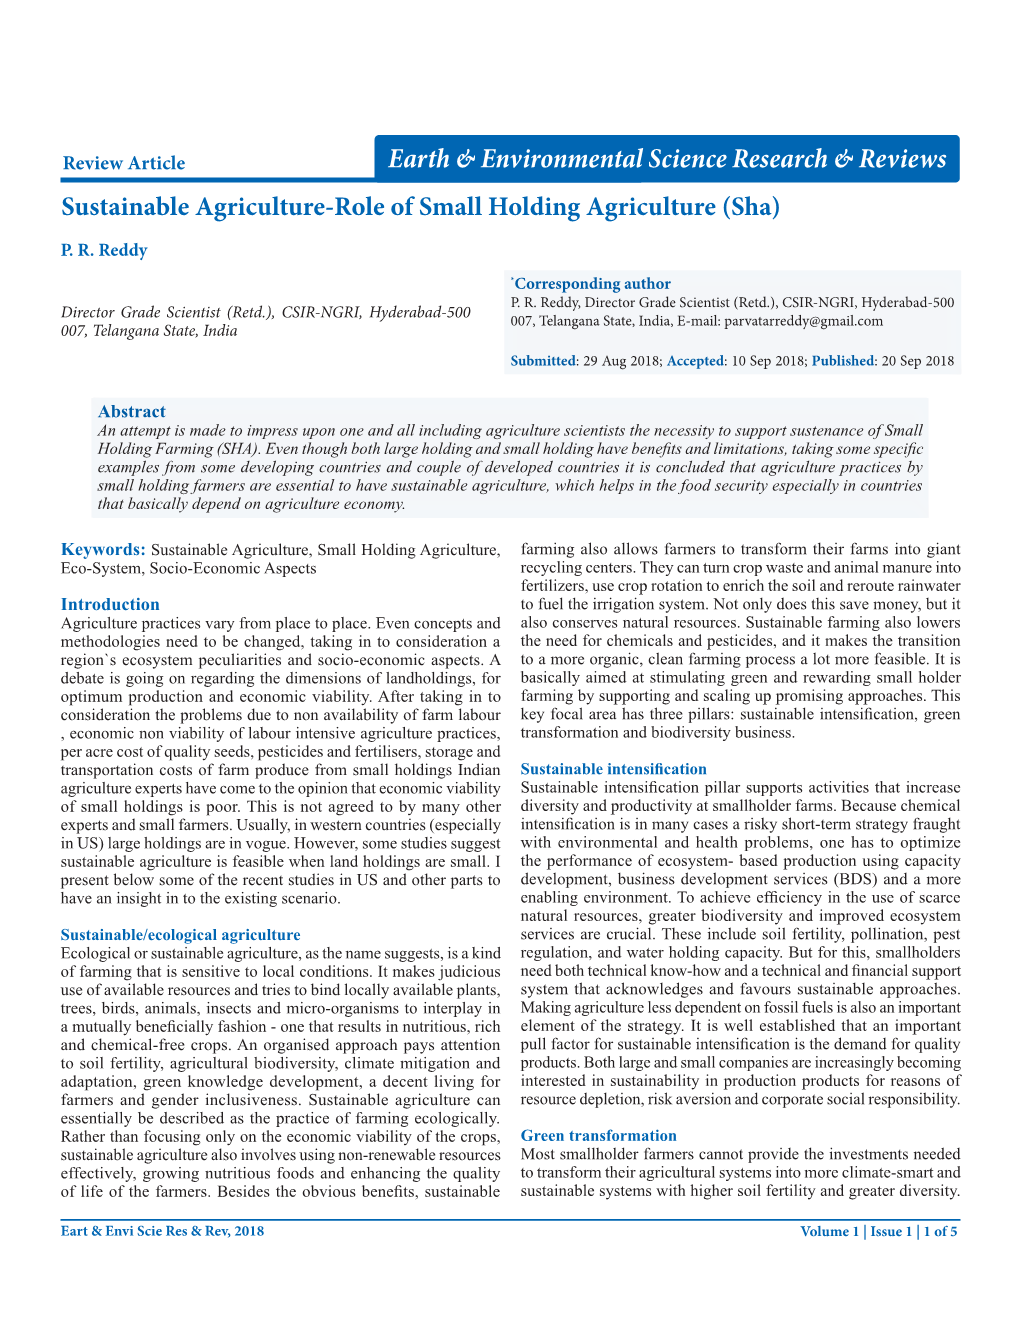 Sustainable Agriculture-Role of Small Holding Agriculture (Sha)